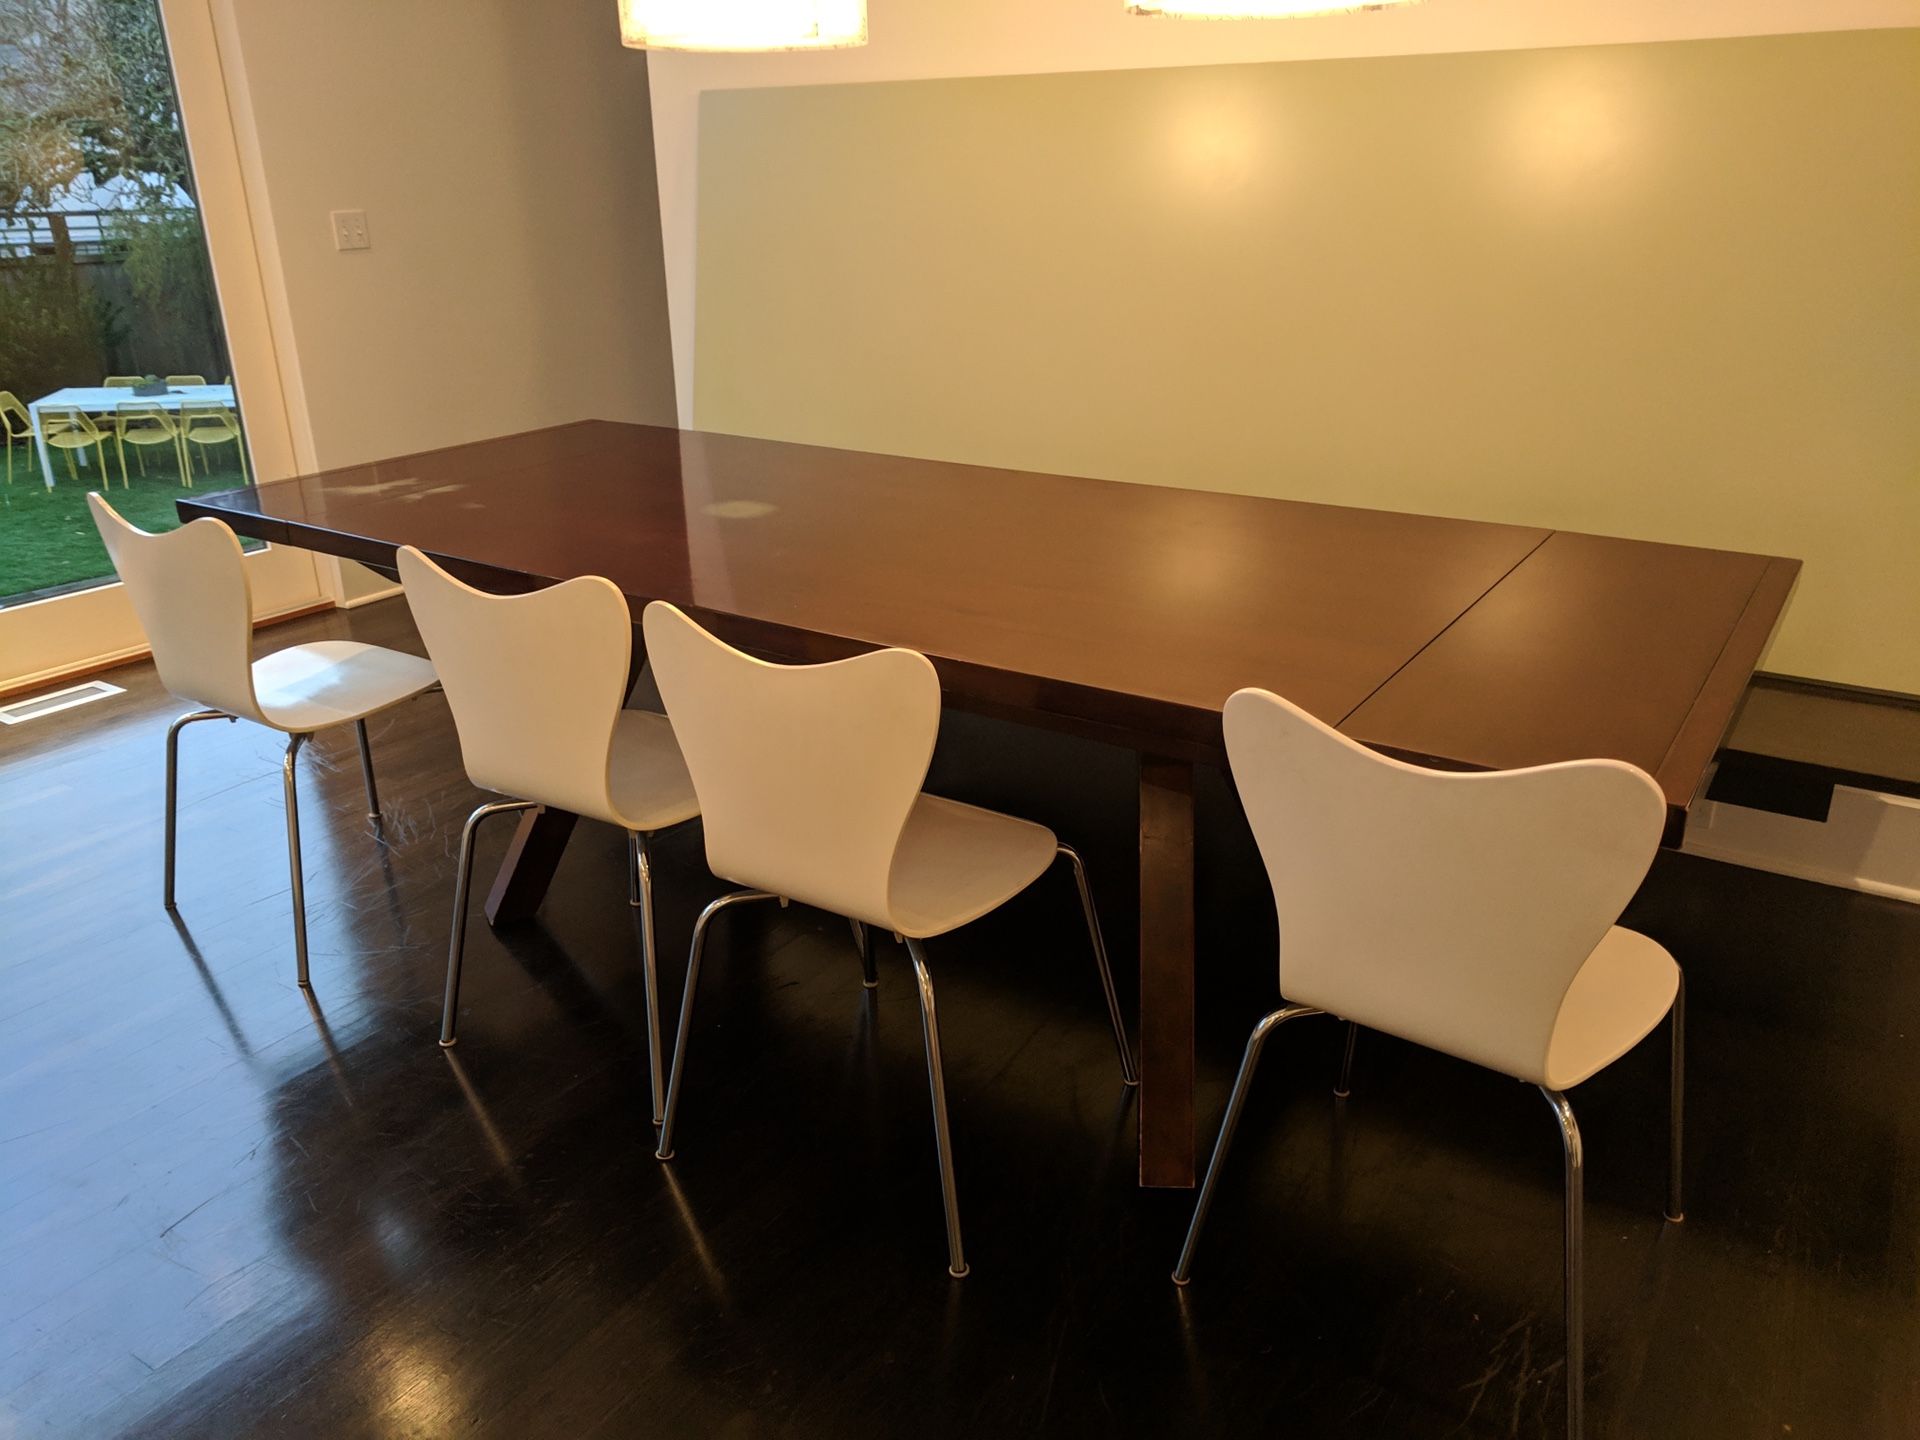 Kitchen dining table